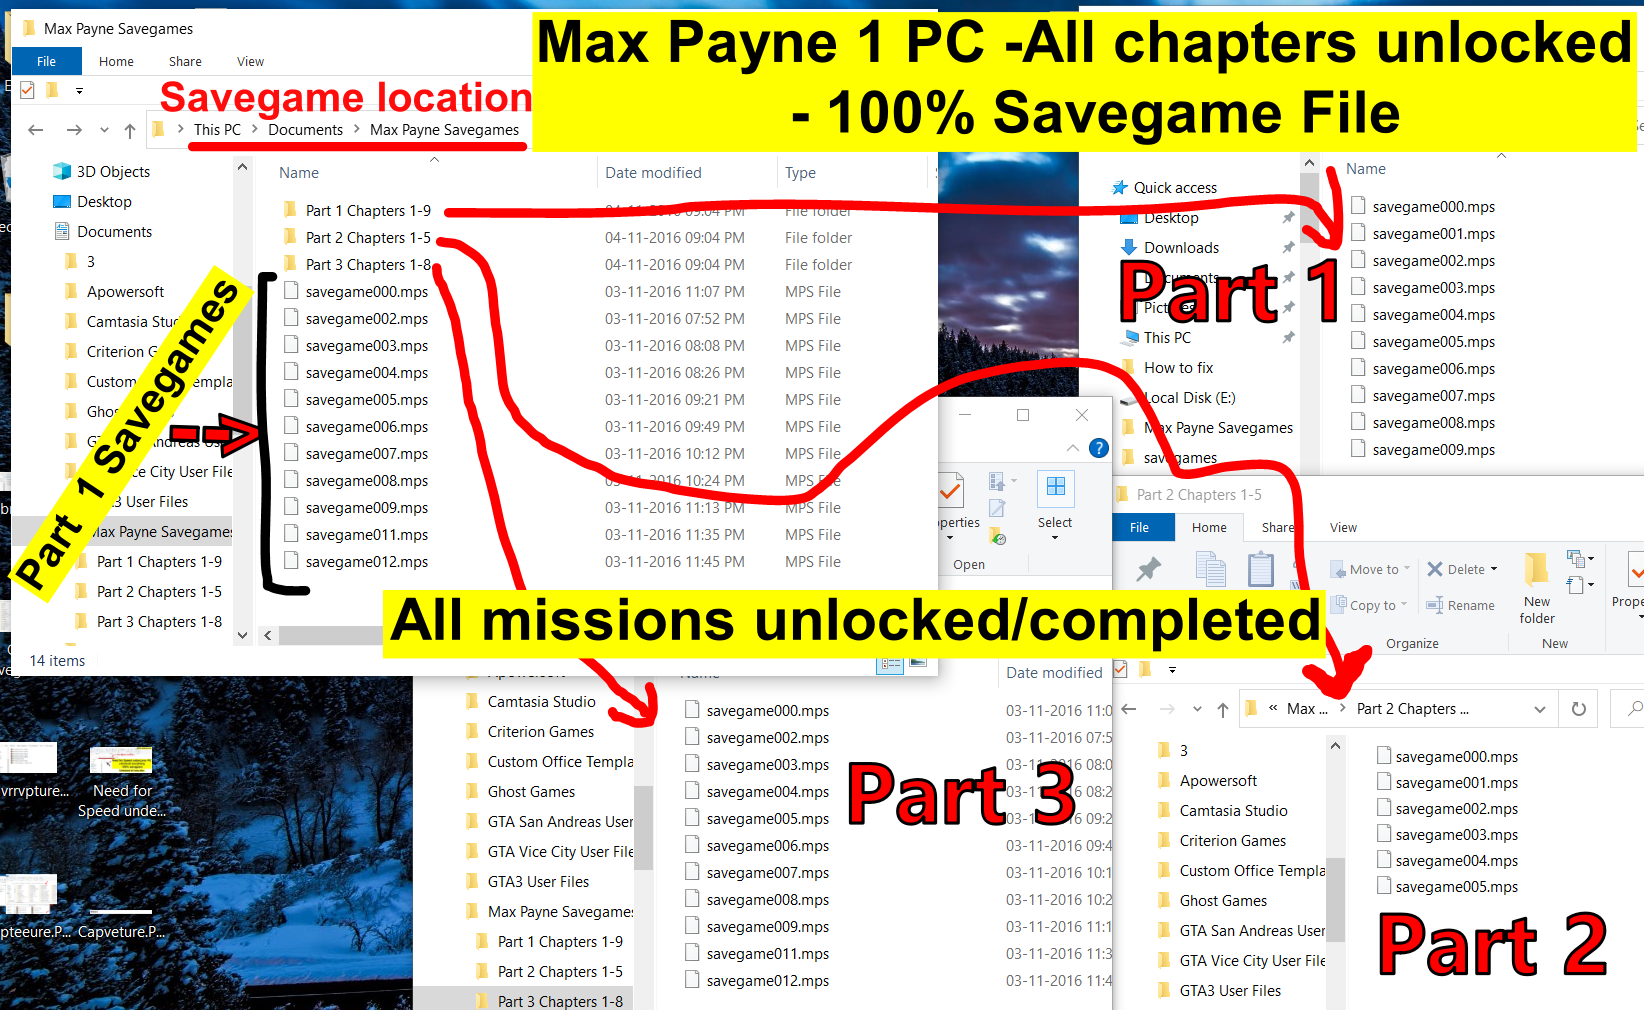 Max Payne PC -All chapters (mission) unlocked - 100% Savegame File